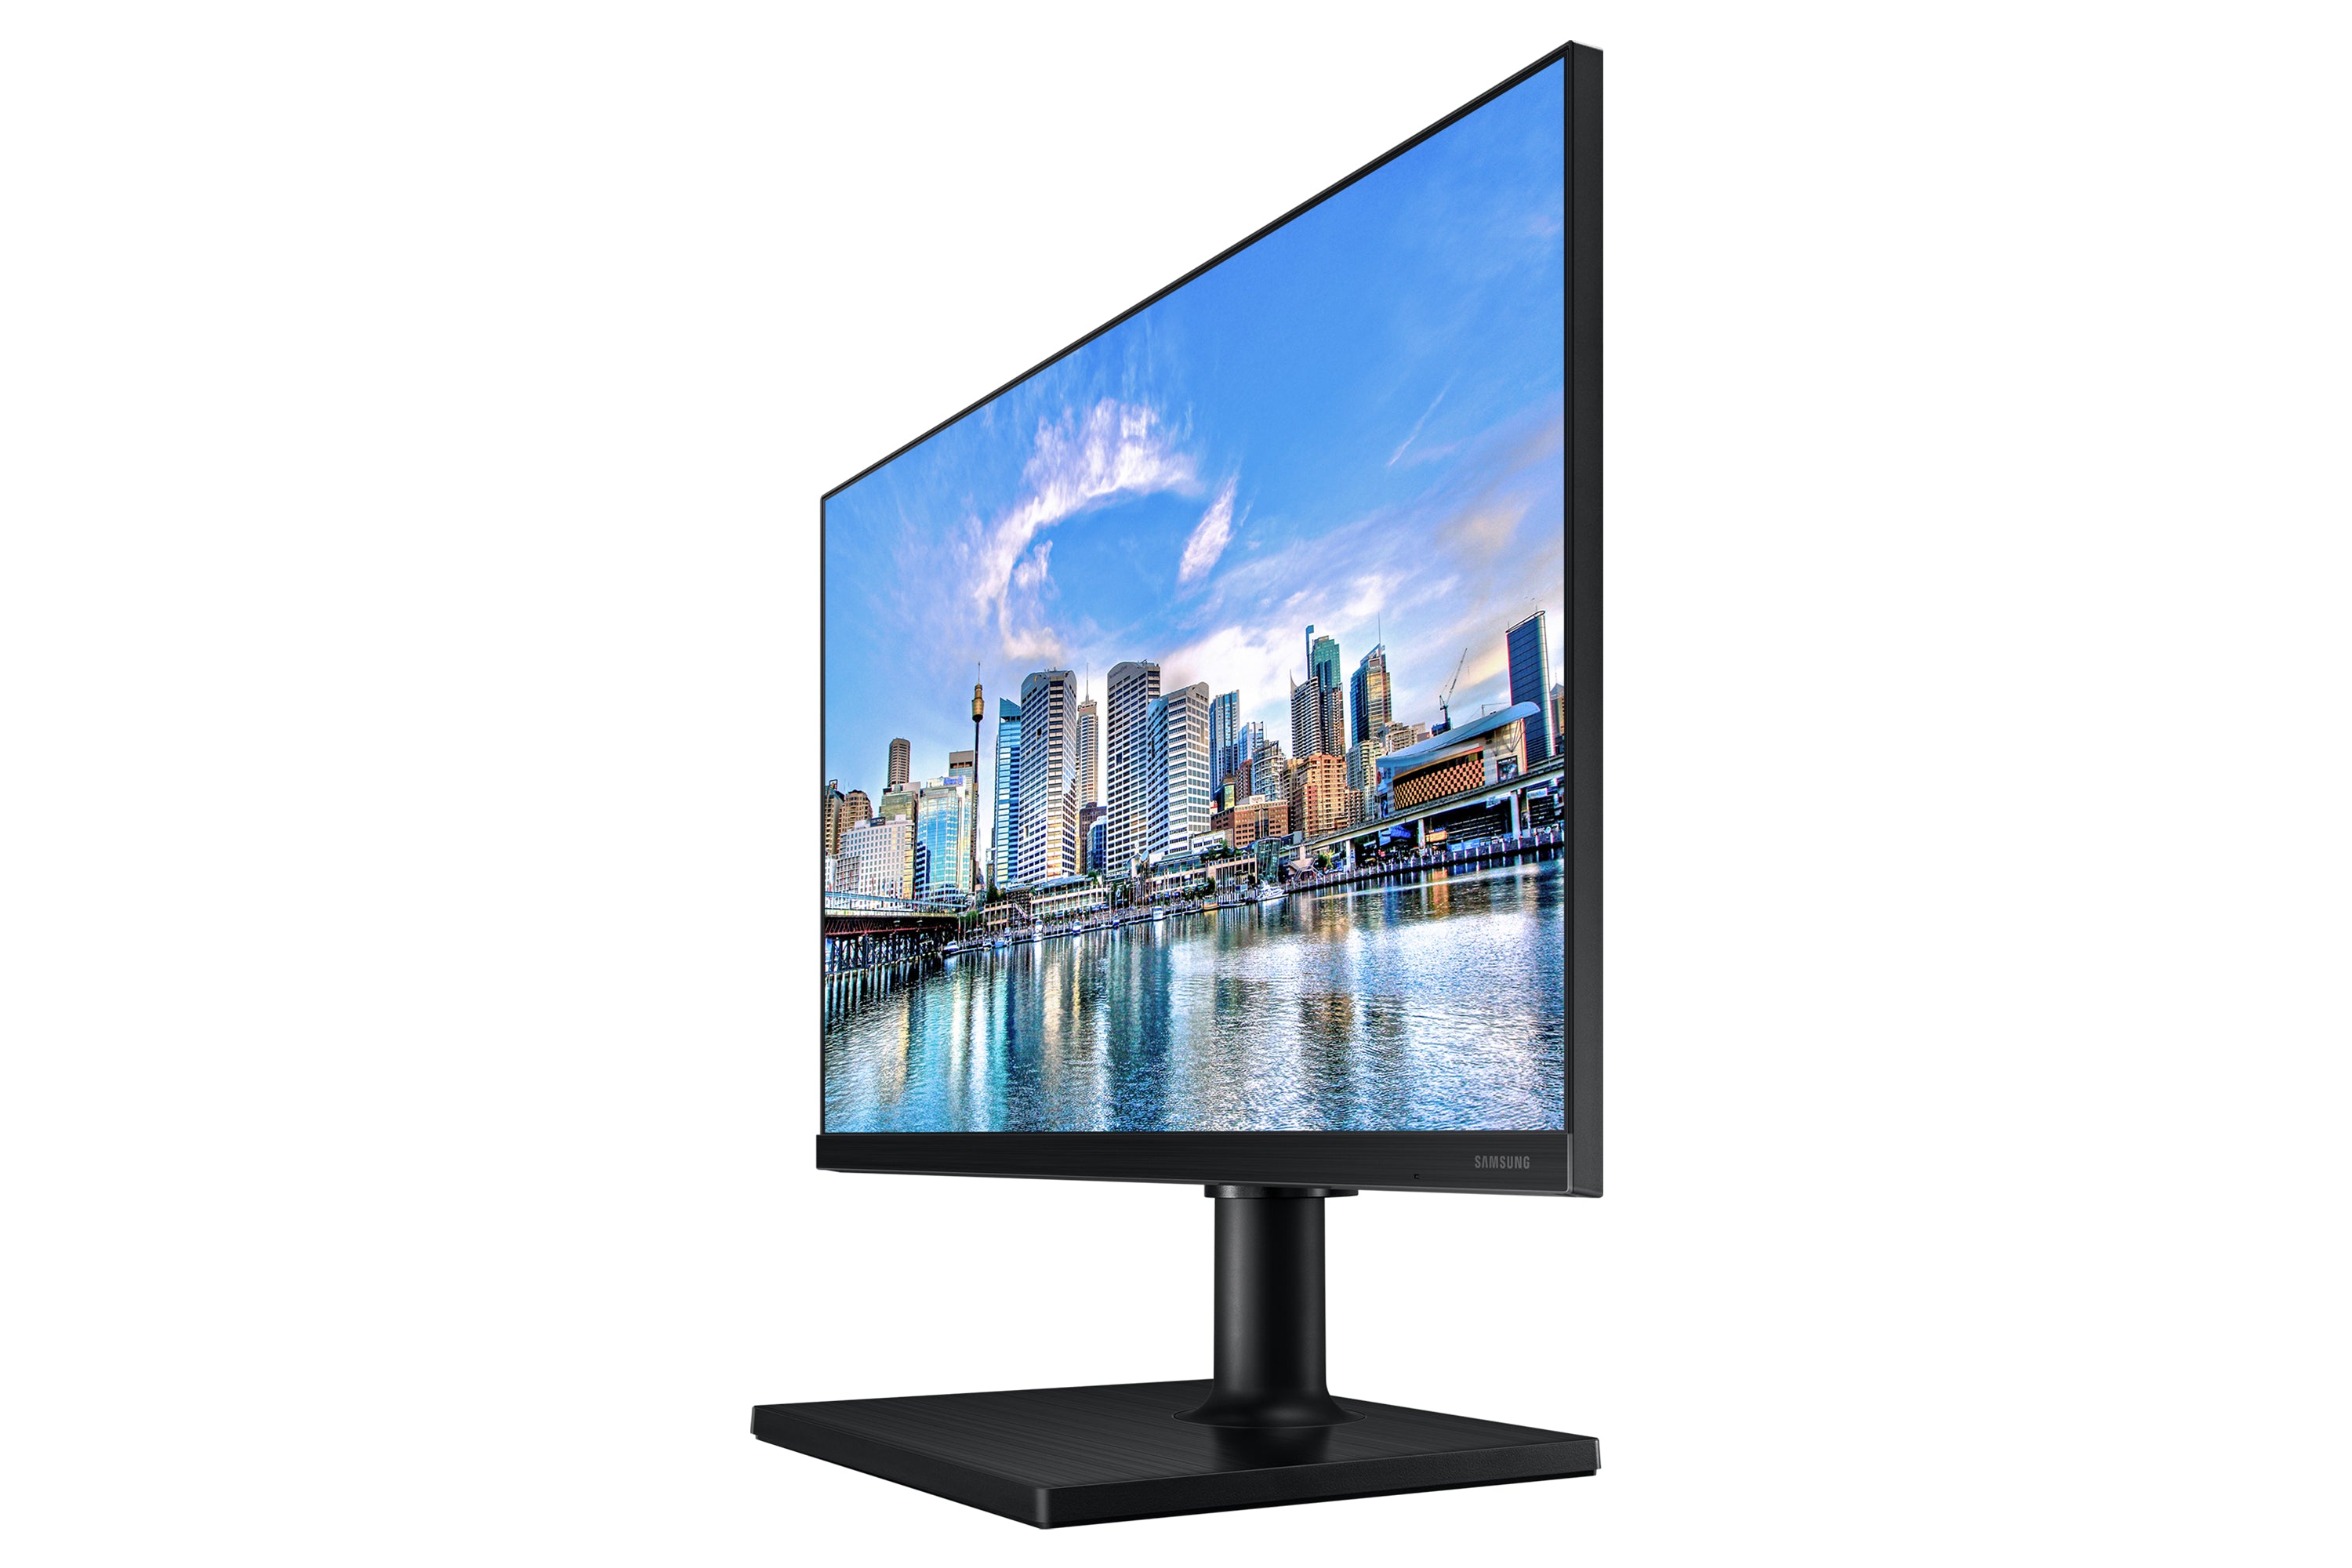 SAMSUNG F27T450F 27" 16:9 1920X1080 IPS,5MS, HAS, HDMI*2/DP, HDMI CABLE.